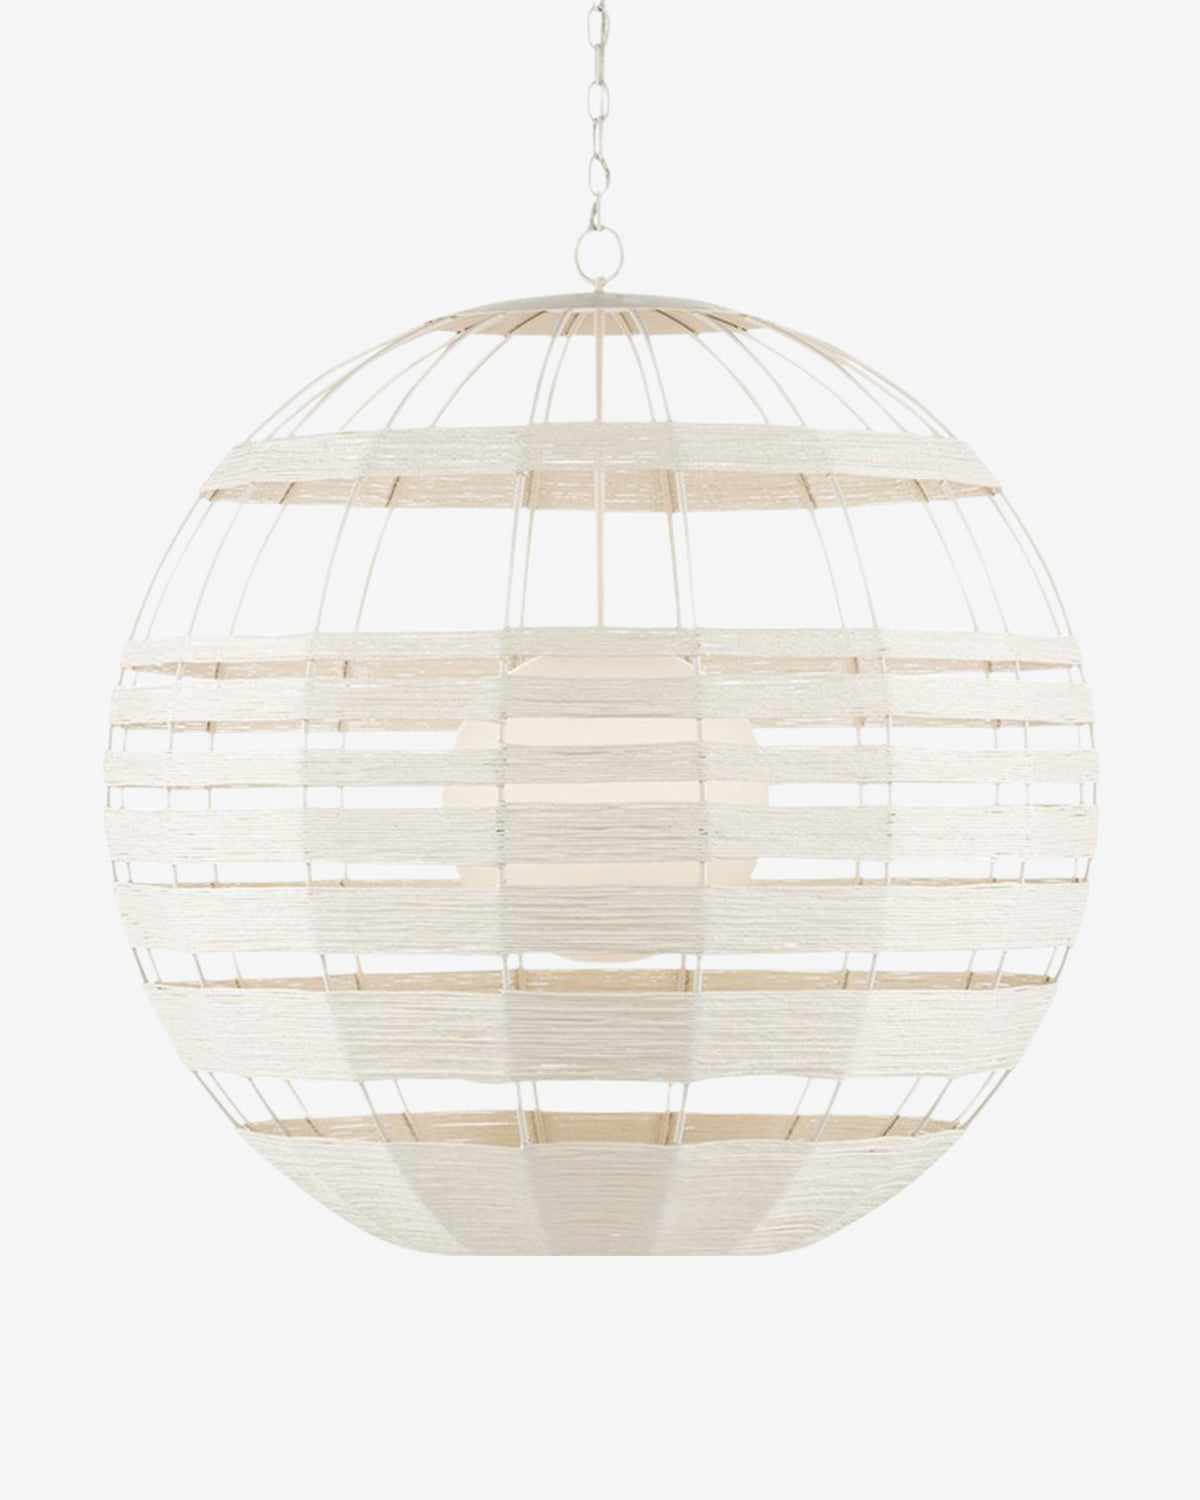 Currey & Co., Lapsley Orb Chandelier